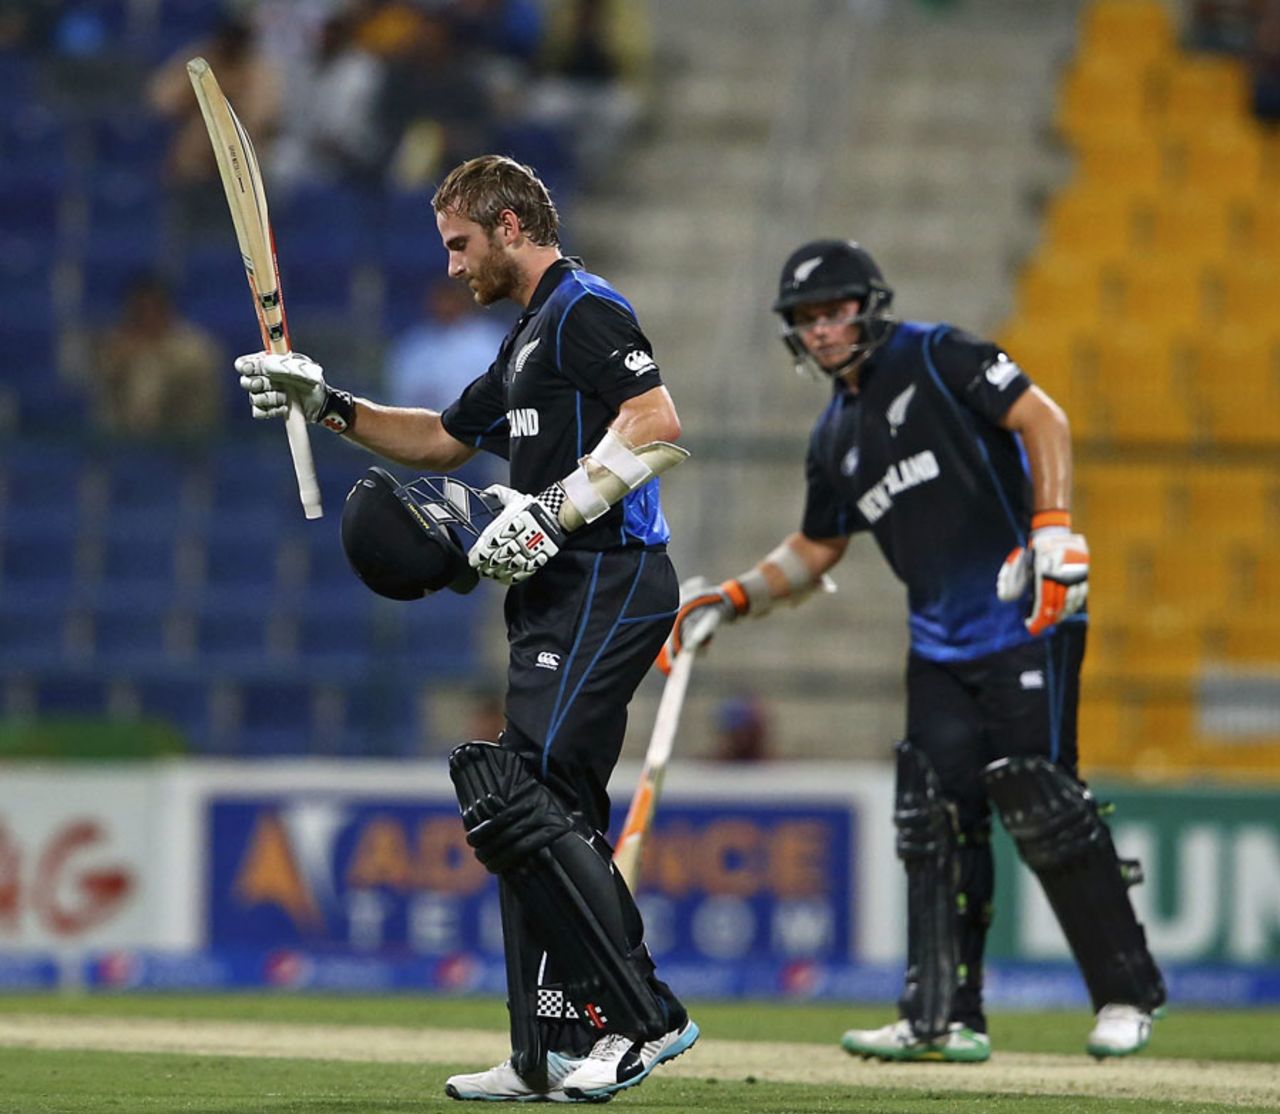 Kane Williamson acknowledges the applause after reaching a century, Pakistan v New Zealand, 4th ODI, Abu Dhabi, December 17, 2014